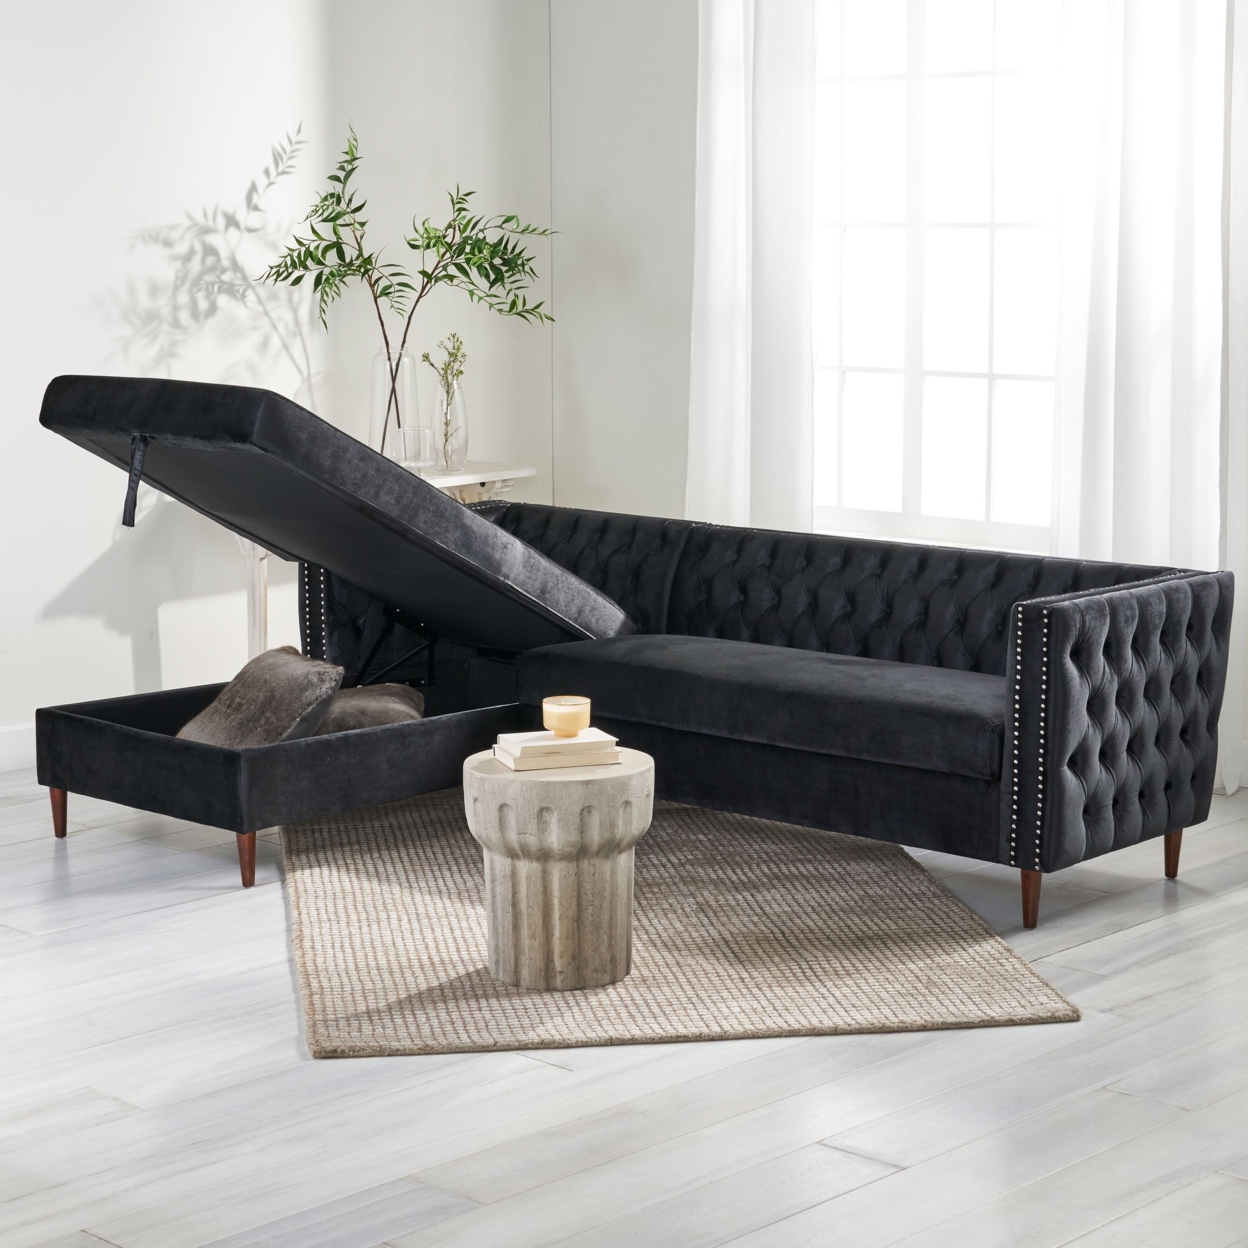 Jephthah Contemporary Tufted Velvet Sectional Sofa With Storage Chaise Lounge - Black